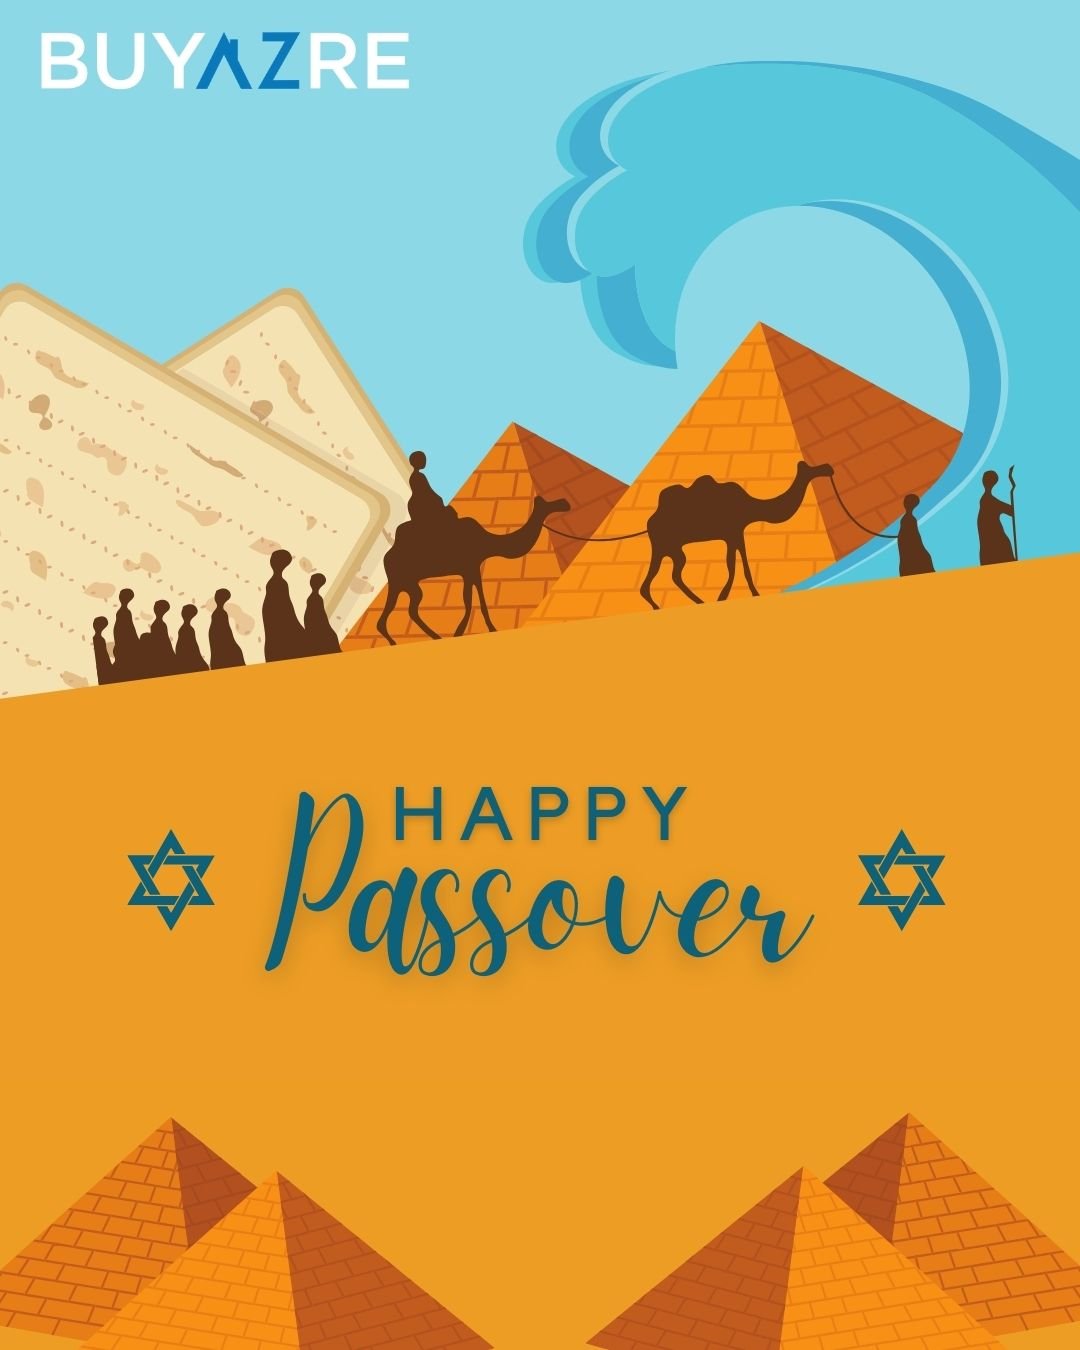 BUYAZRE extends warm wishes for a Passover filled with joy, laughter, and cherished moments with loved ones. 

May this holiday be a time of celebration and reflection. 

Chag Pesach Sameach! 🕊️🌿 

#PassoverJoy #BUYAZRE